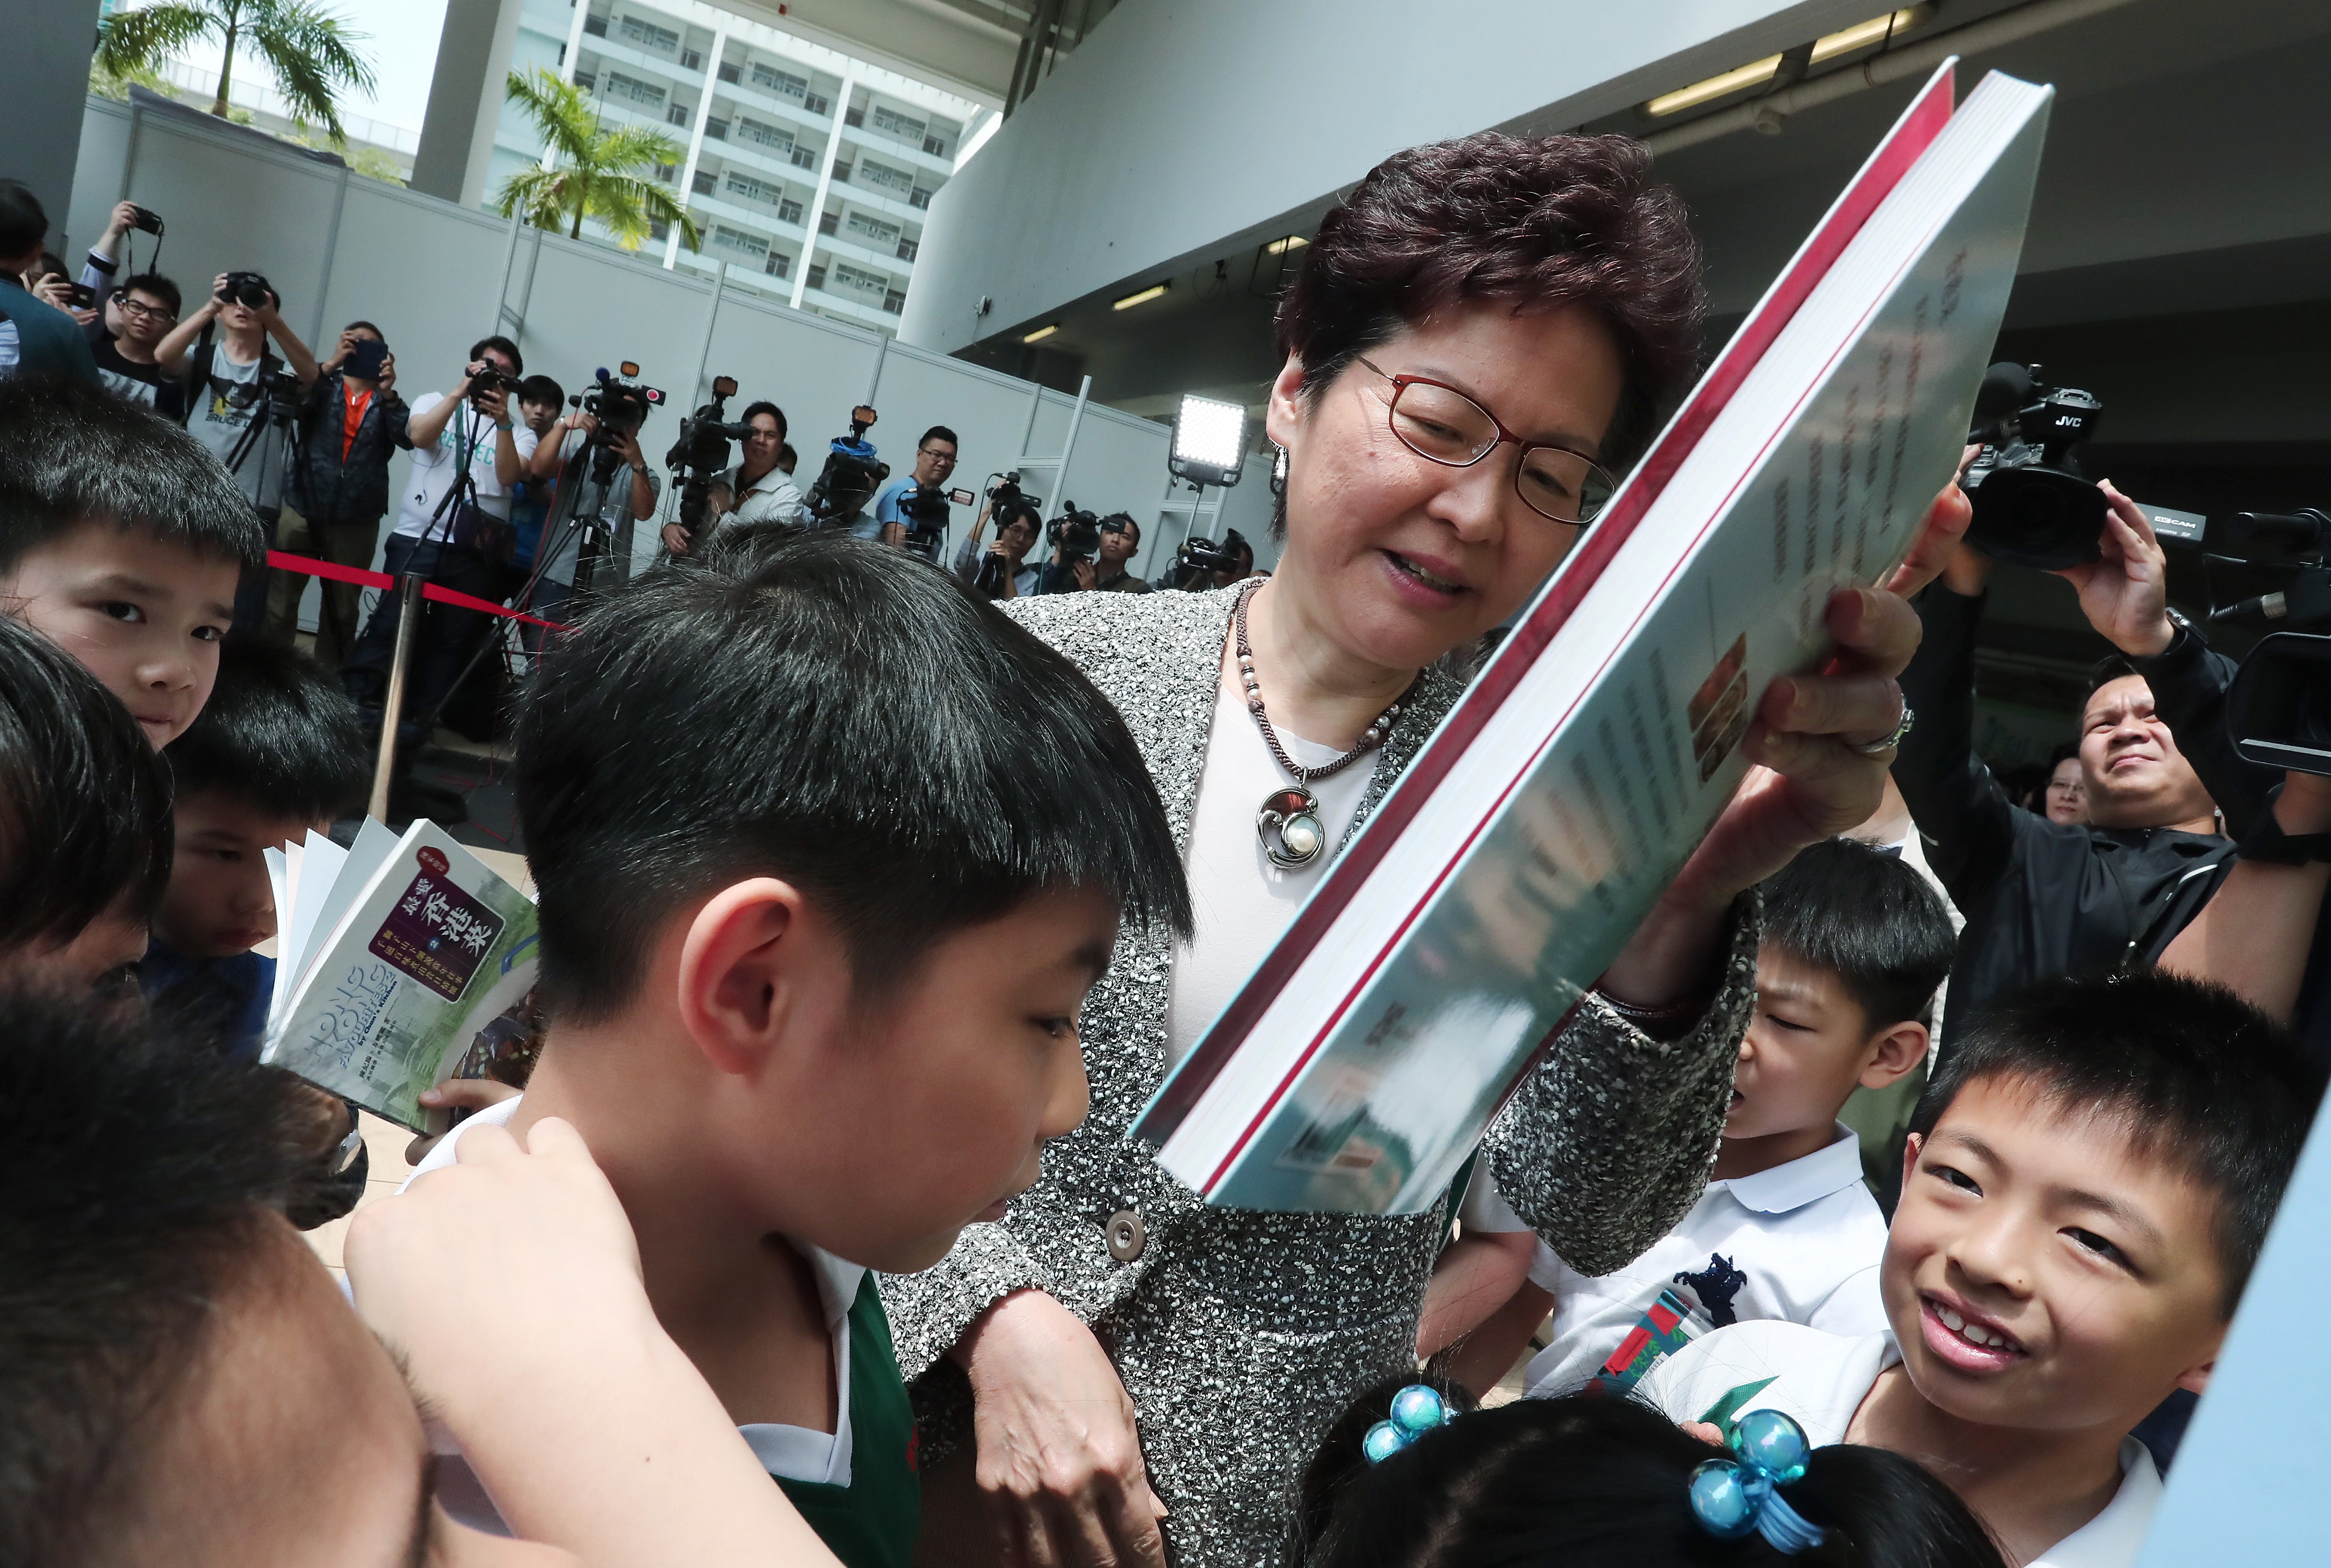 Chief Executive Carrie Lam Cheng Yuet-ngor tours the Leisure and Cultural Services Department’s “My Pop-up Library”, after the opening ceremony for the 2018 World Book Day, at a school in Sham Shui Po on April 21. Photo: Jonathan Wong